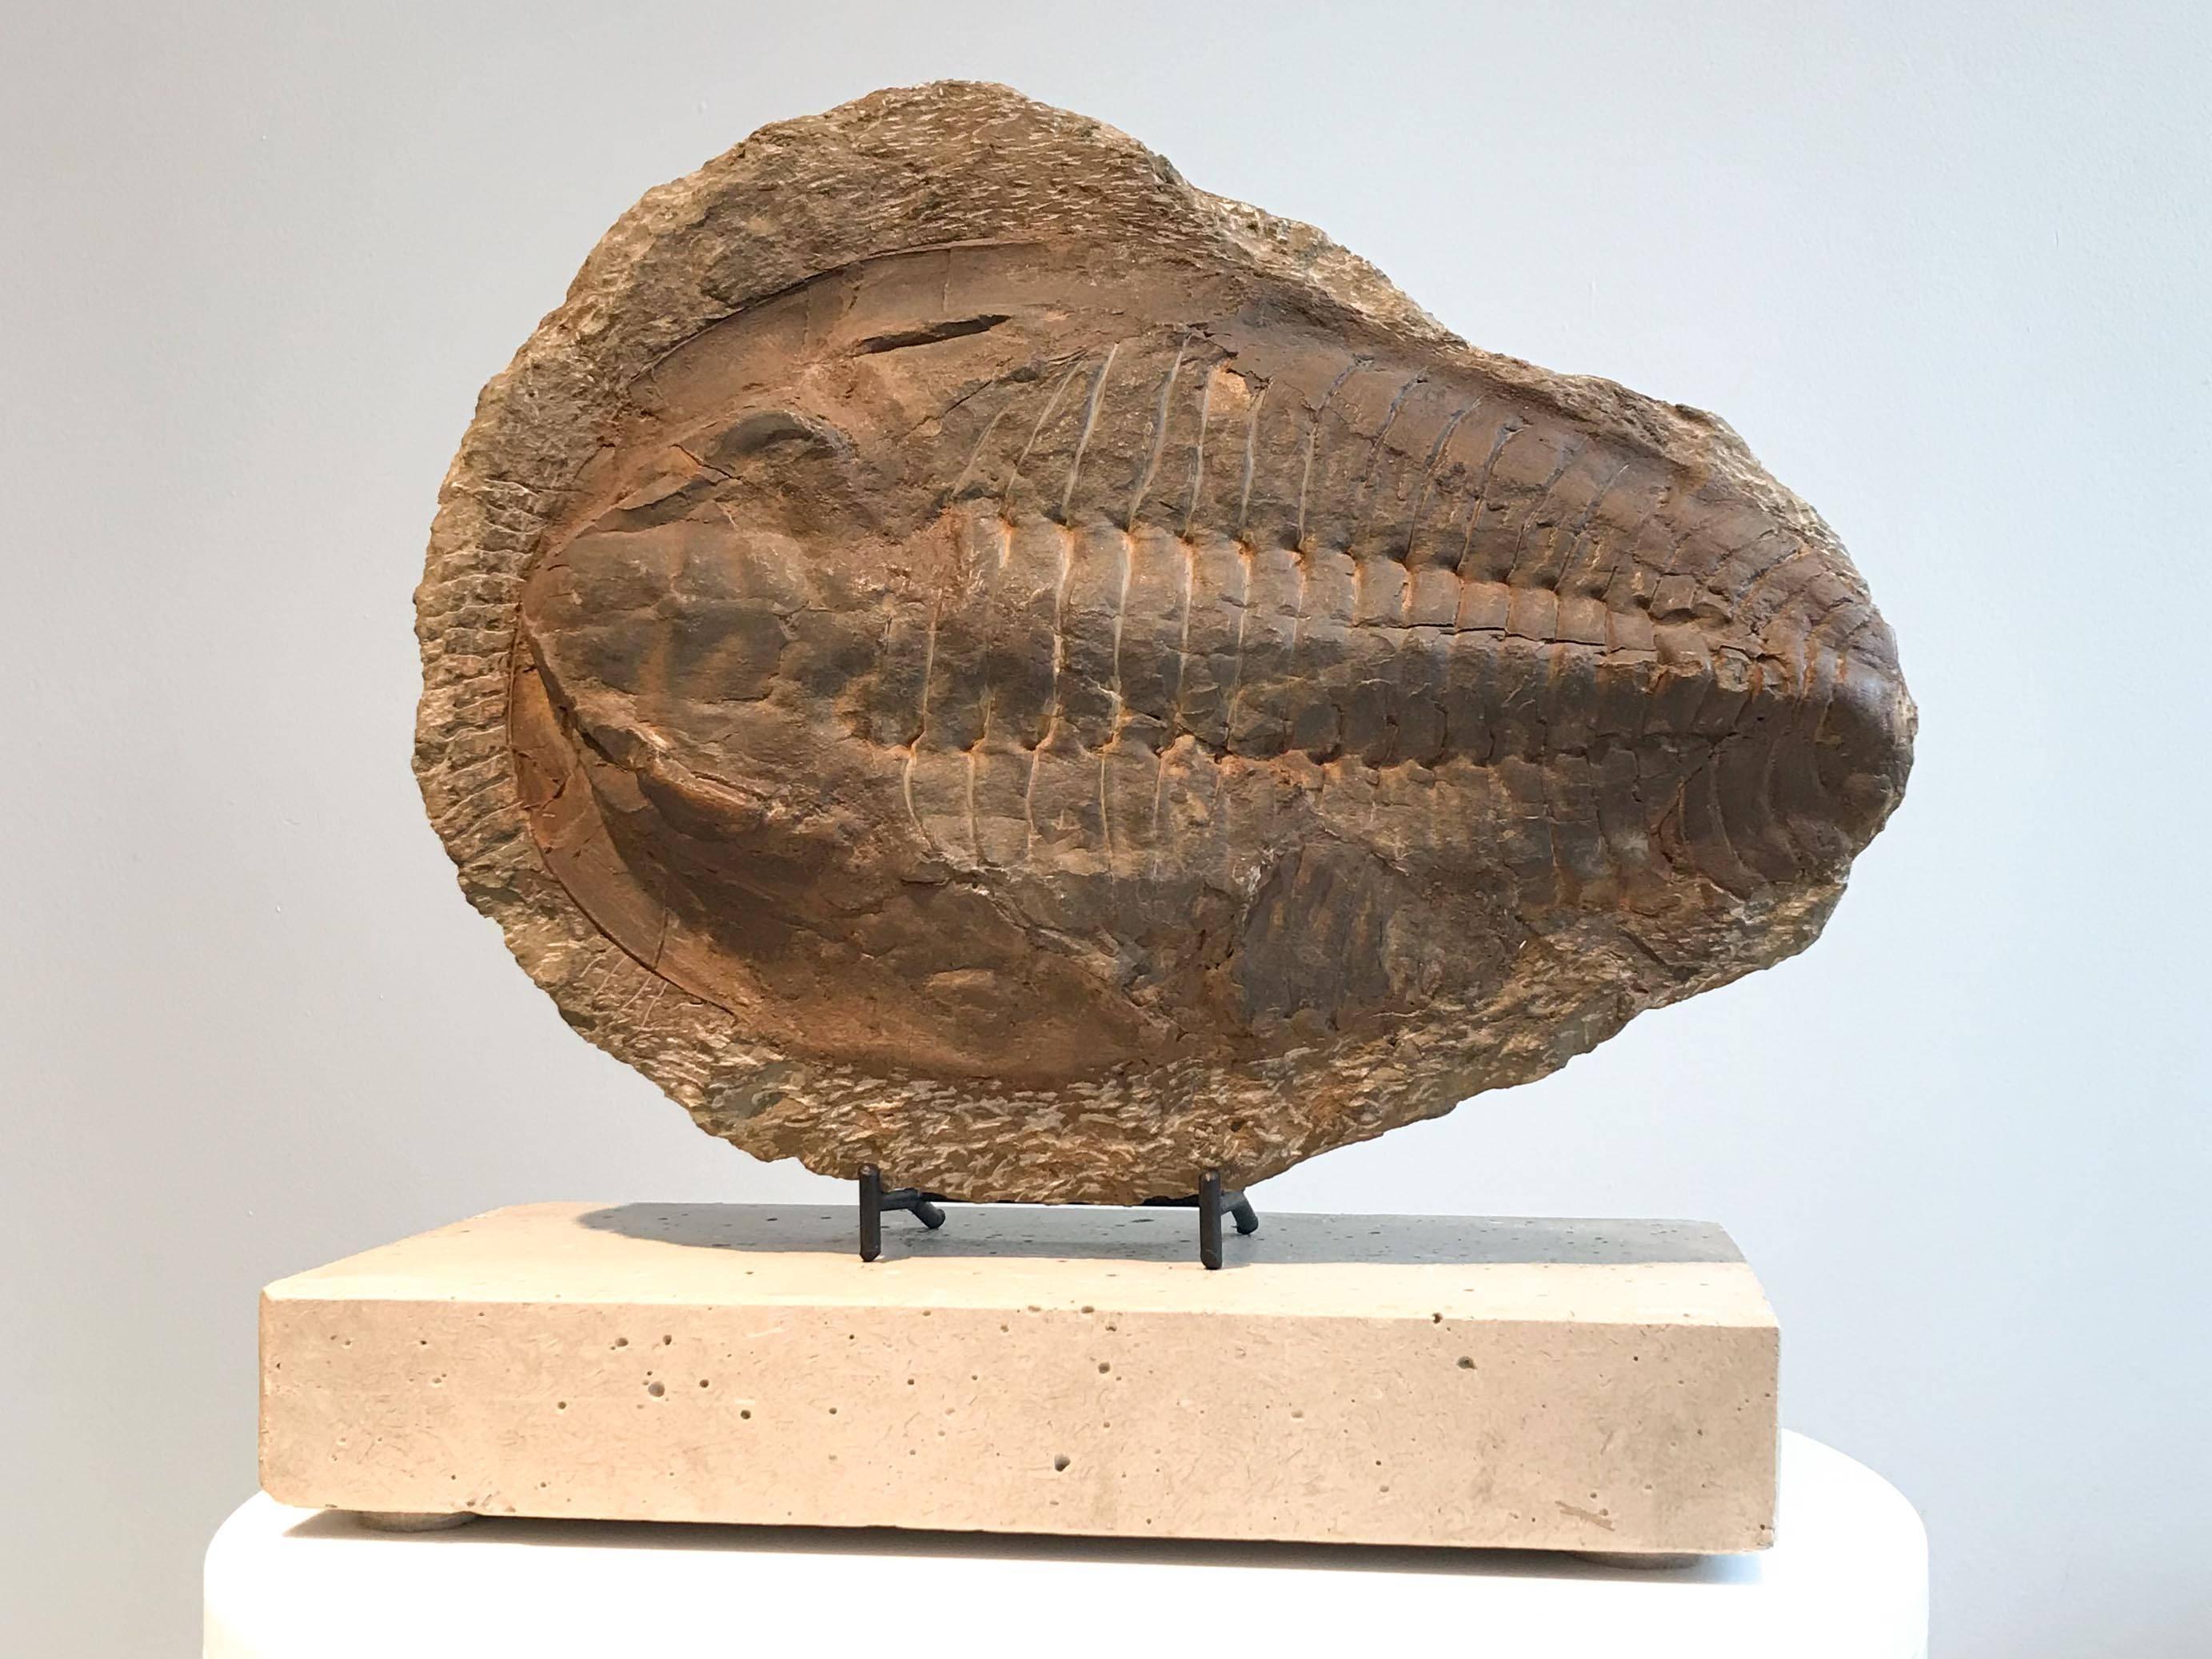 Giant trilobite fossil with stand.